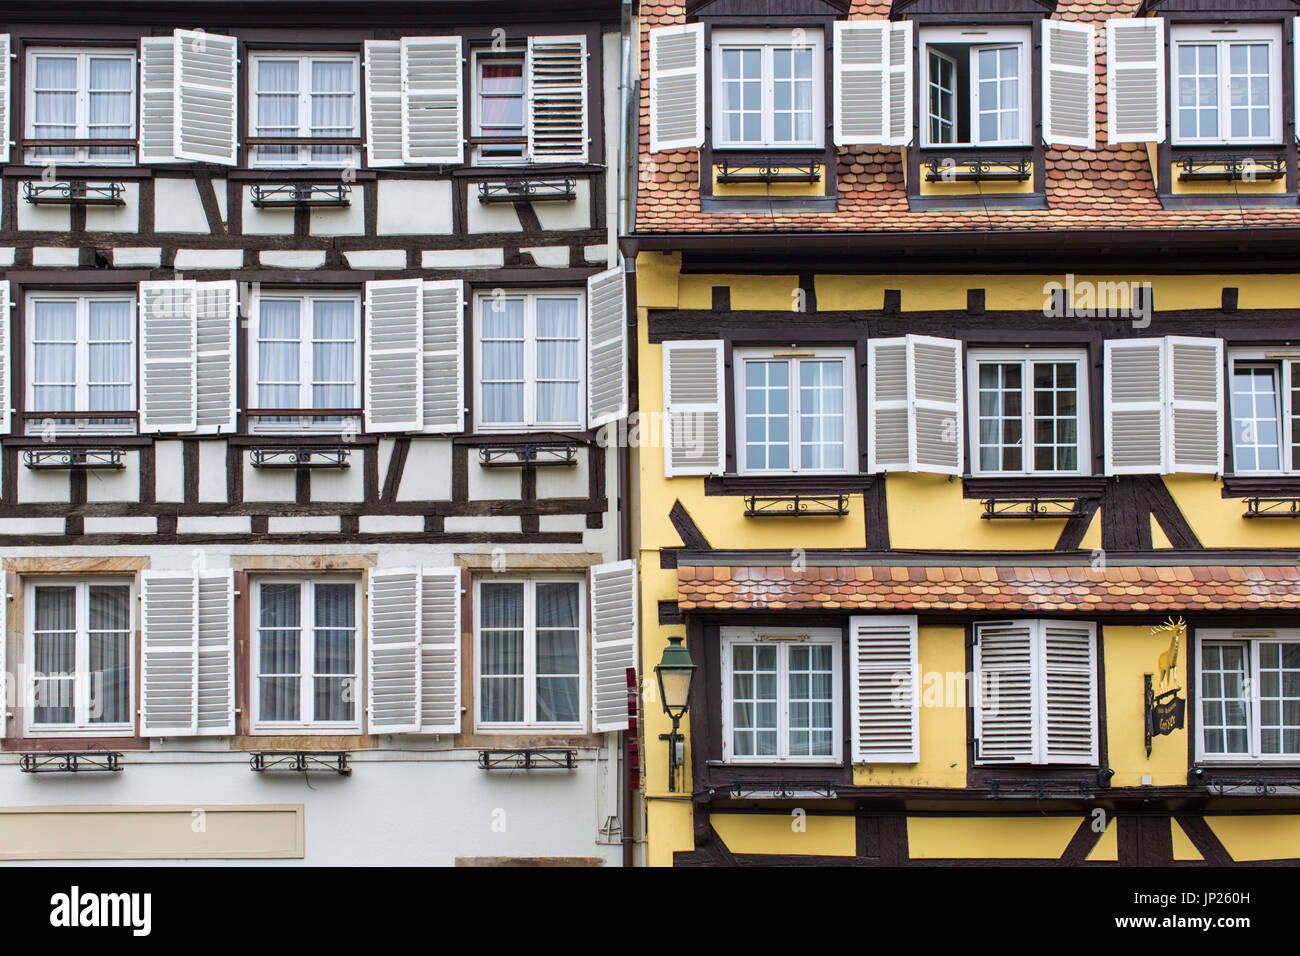 Strasbourg, Alsace, France - May 3, 2014: Typical half timbered buildings of the Alsace in Strasbourg. Strasbourg is the capital of the Grand Est region (formerly Alsace) of France and the official seat of the European Union. Stock Photo